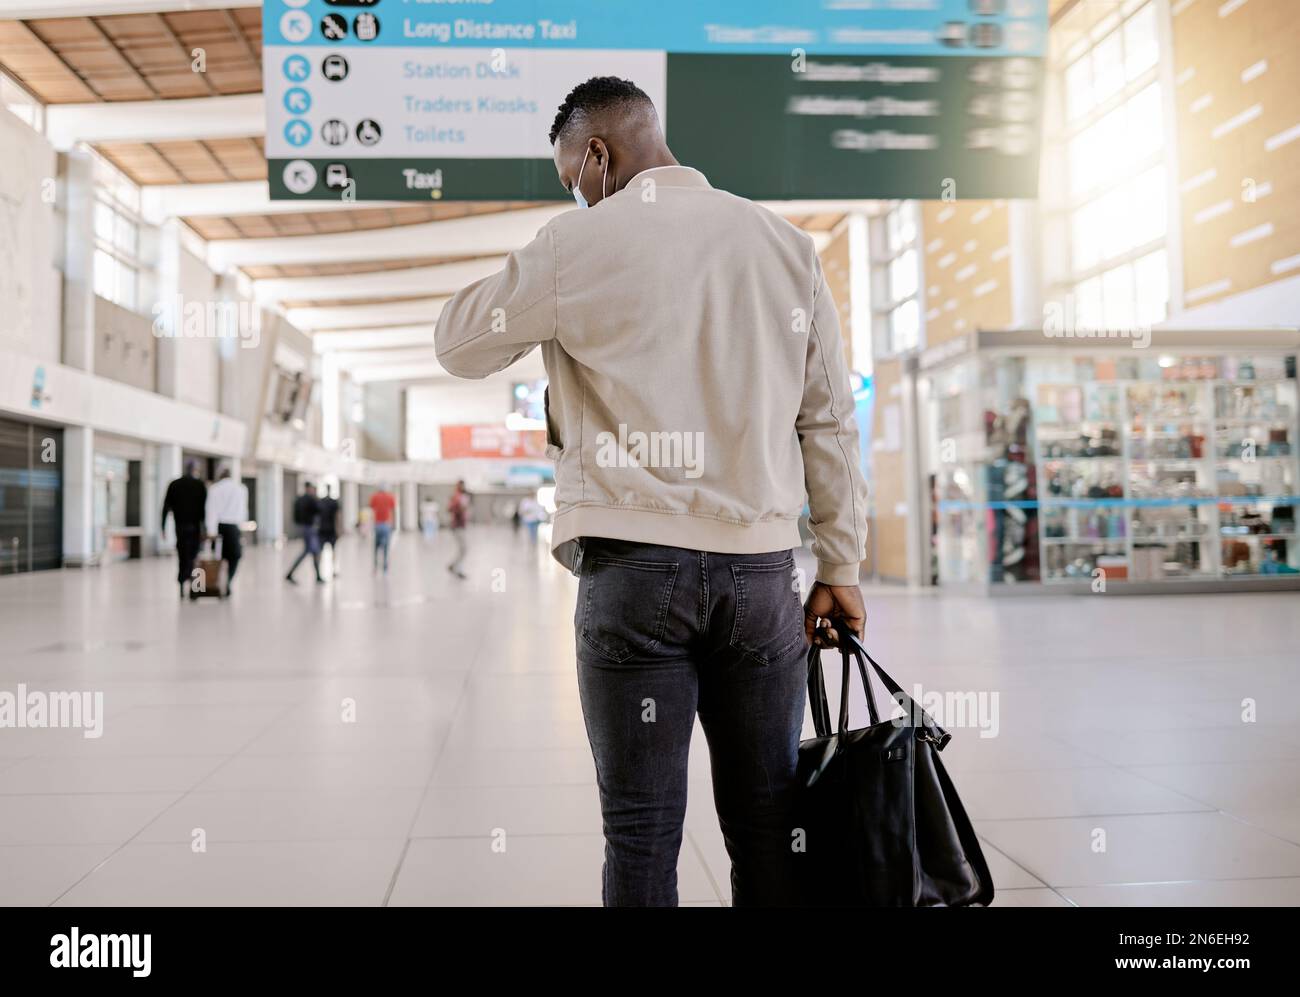 Rear view of African american businessman travelling alone and standing in a train station while checking his travel times on his watch Stock Photo